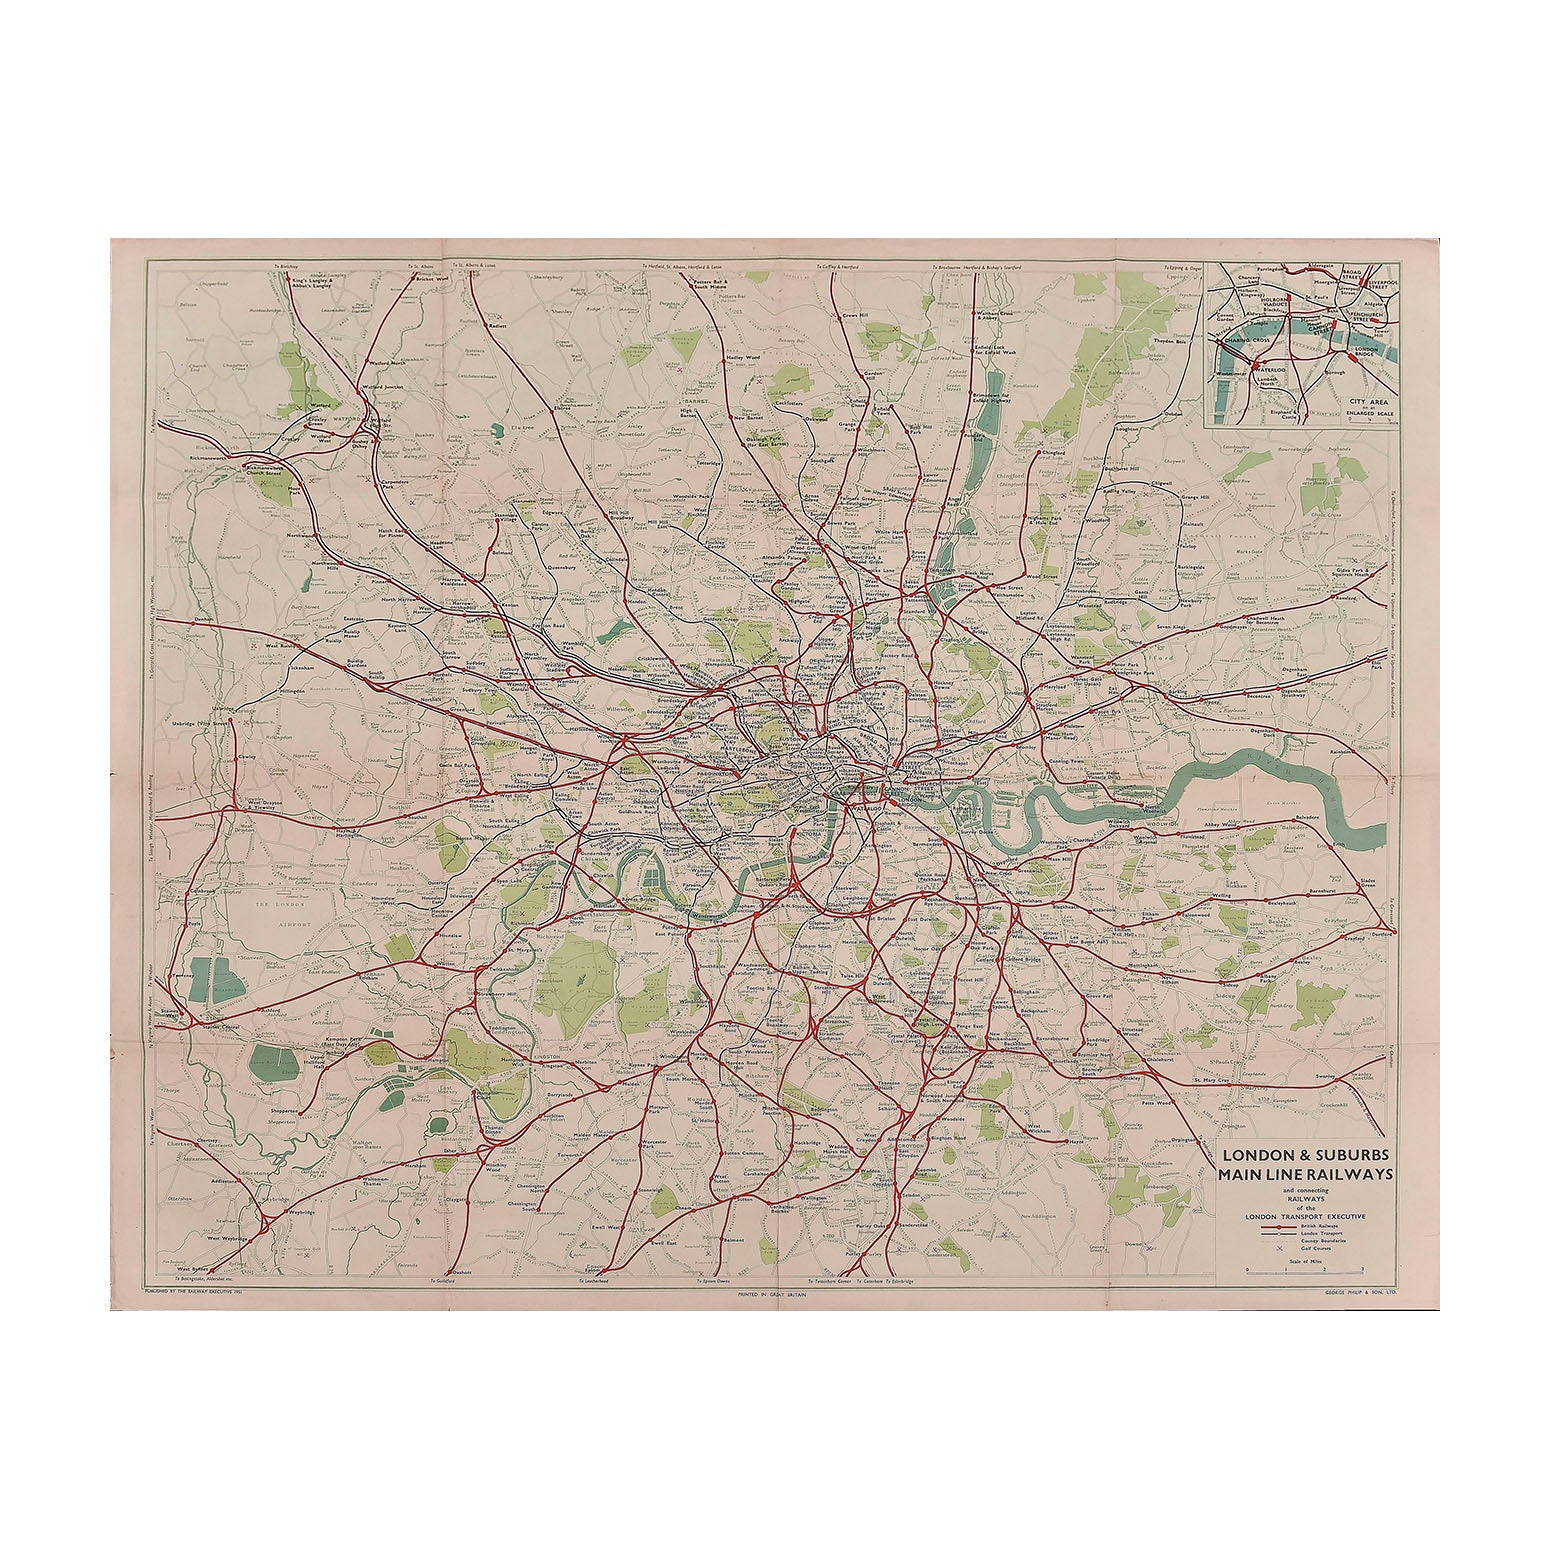 An original Railway Executive poster map of the Greater London Area, showing main line, suburban and London Transport routes, 1951. The map incudes an enlarged diagram of the ‘City Area’ (top right) 